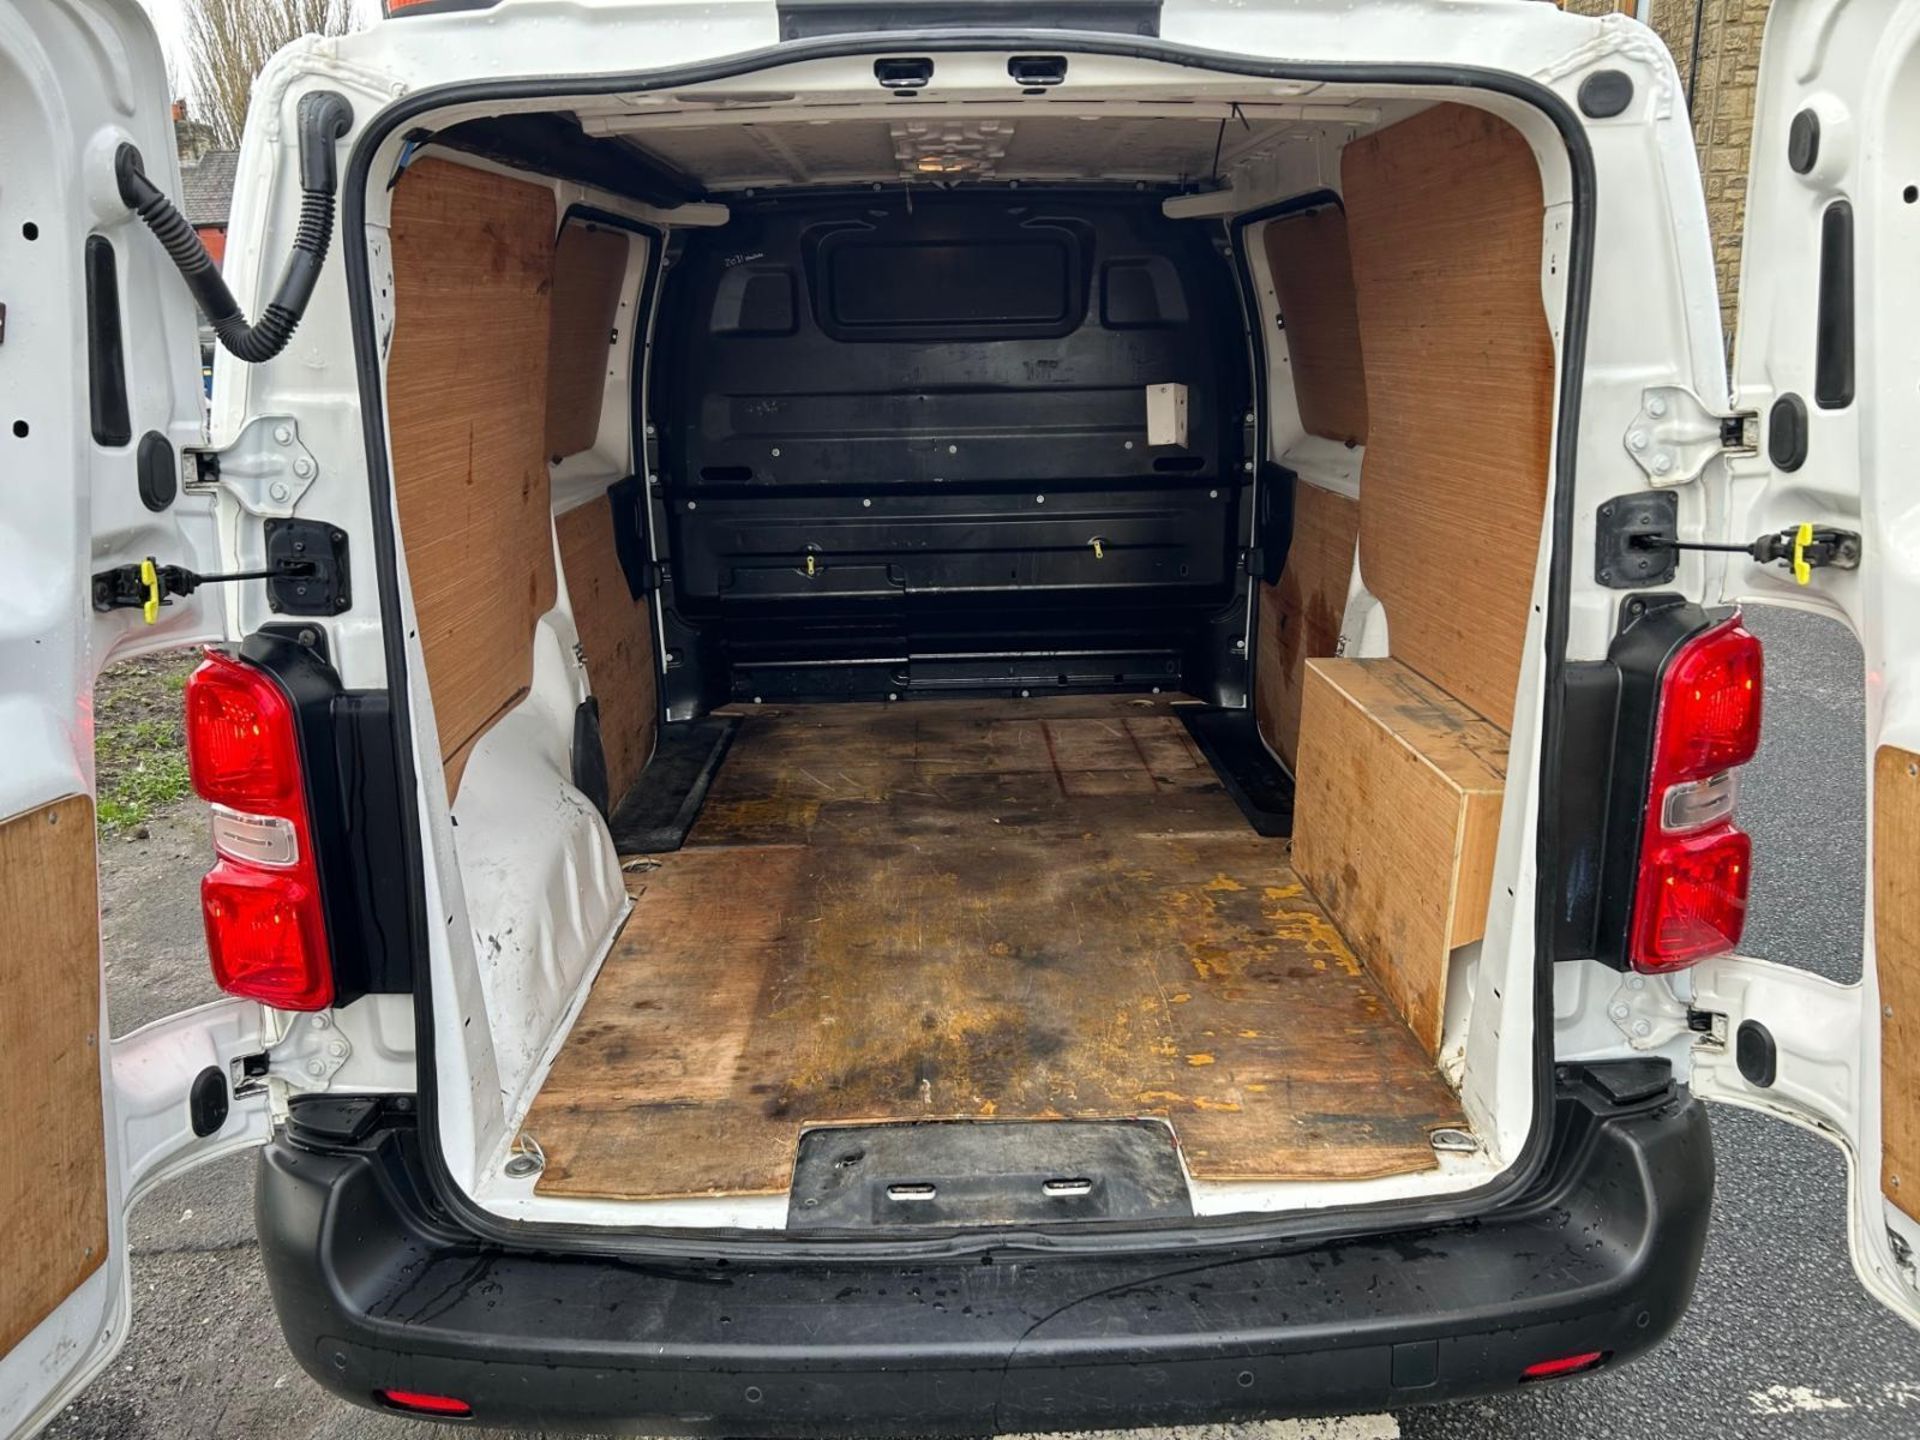 2019 CITROEN DISPATCH - 124K MILES - HPI CLEAR - READY TO GO ! - Image 8 of 12